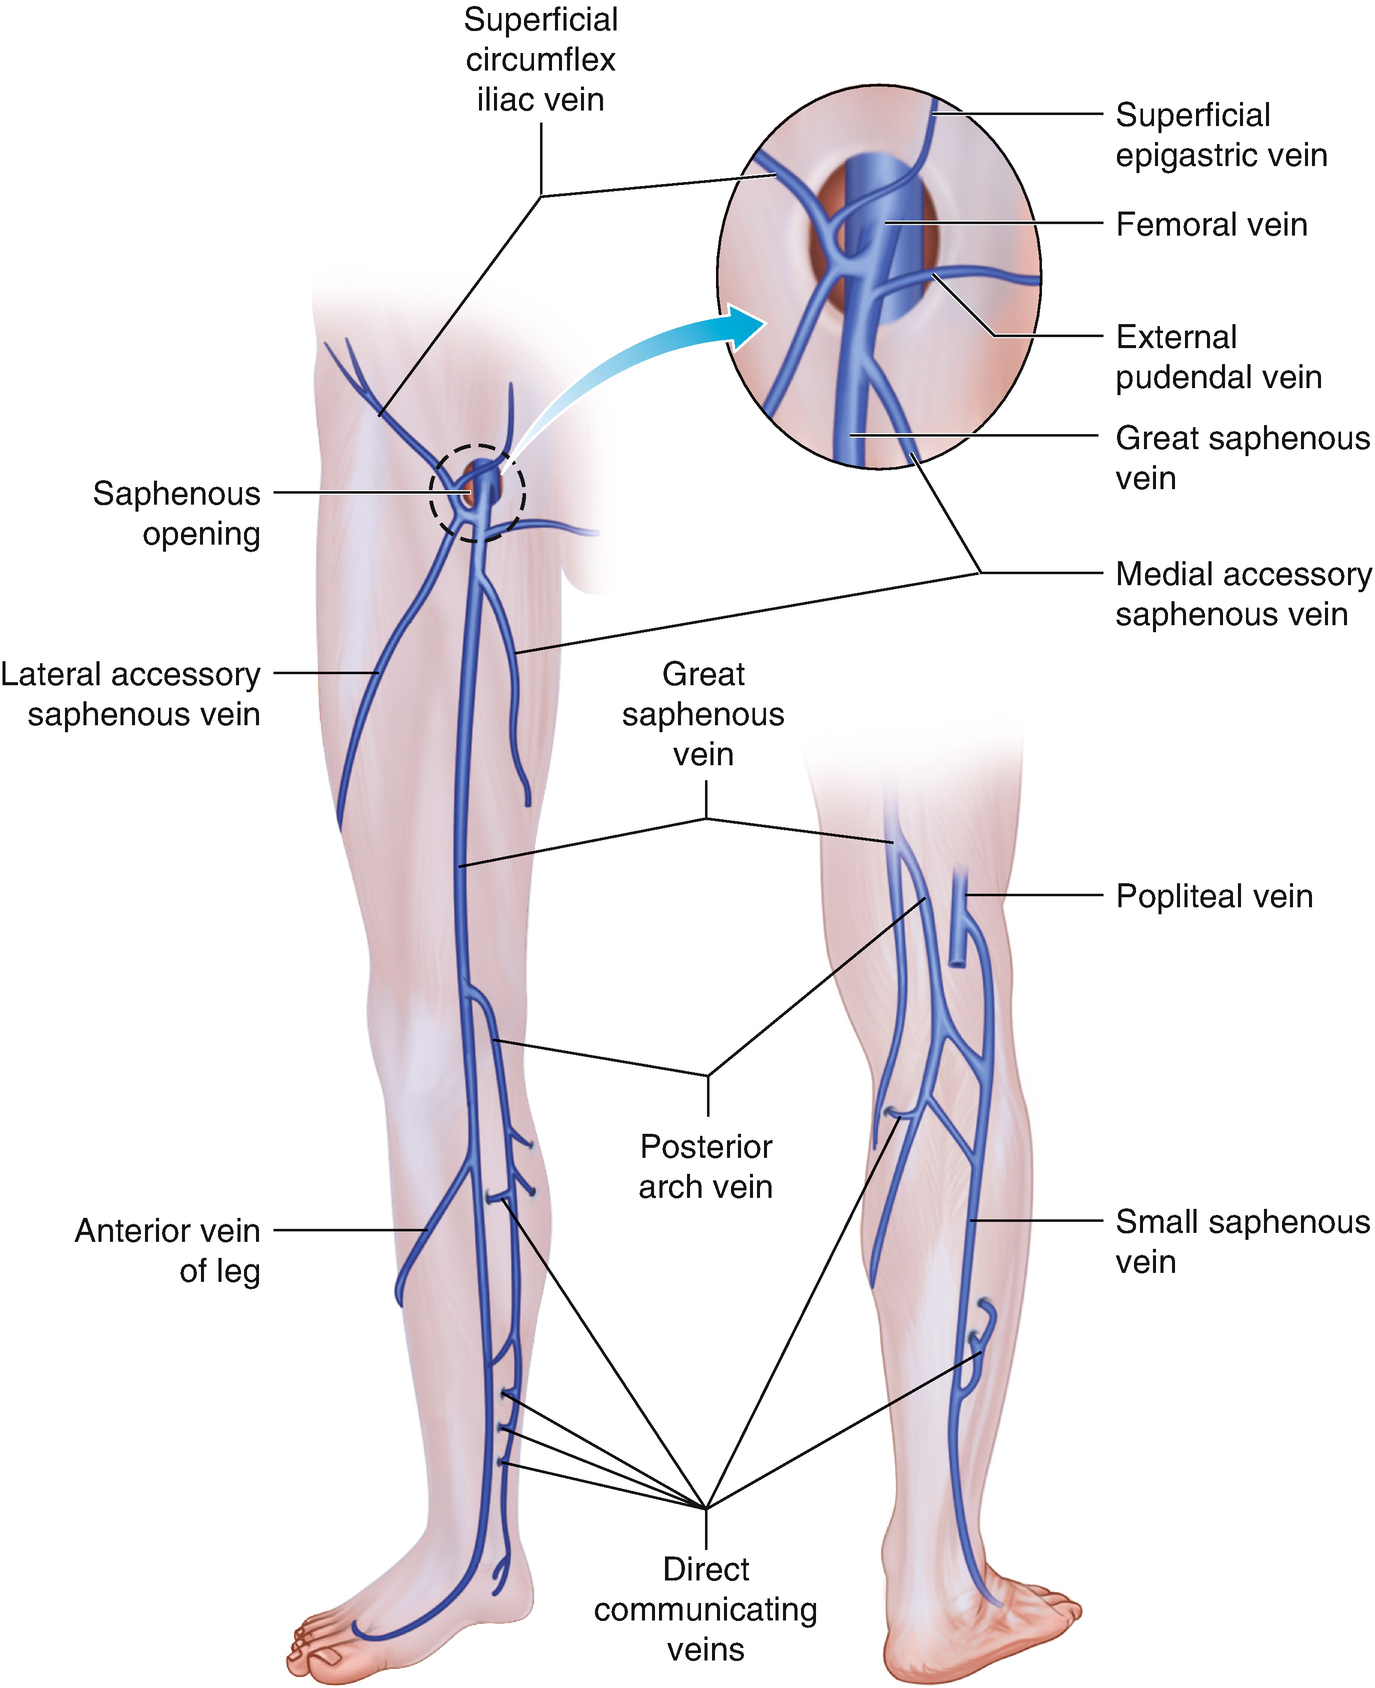 sites of communicating veins